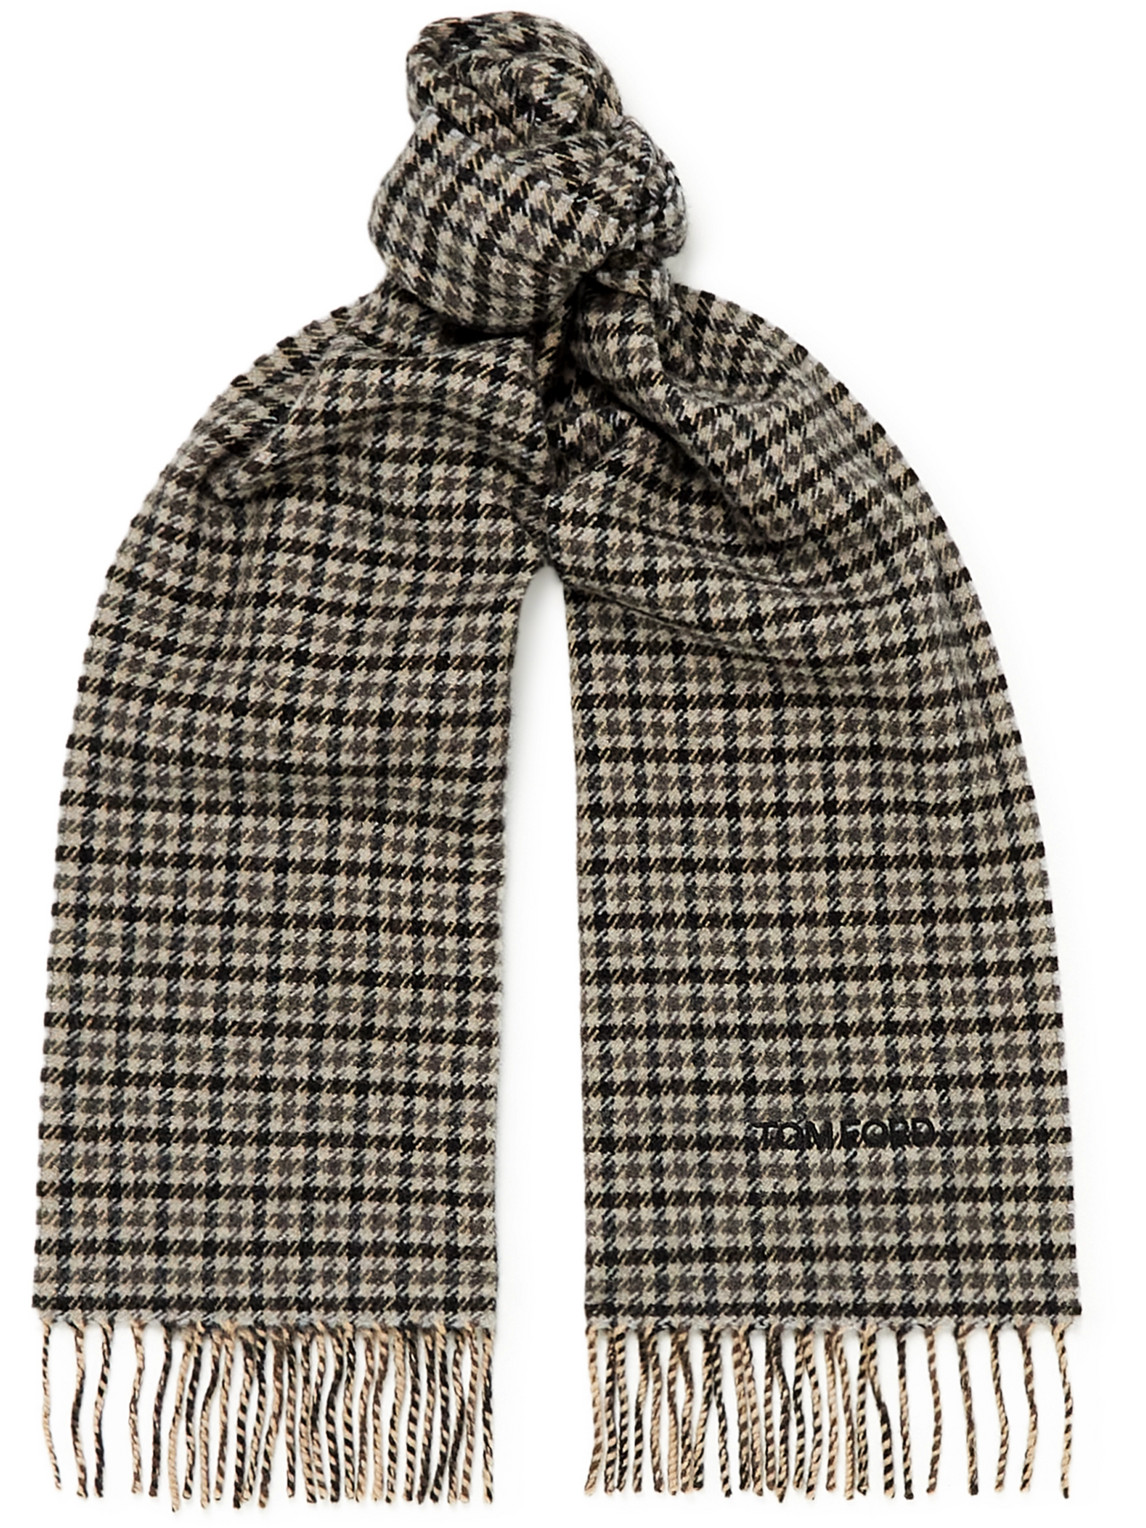 TOM FORD FRINGED HOUNDSTOOTH WOOL AND CASHMERE-BLEND SCARF